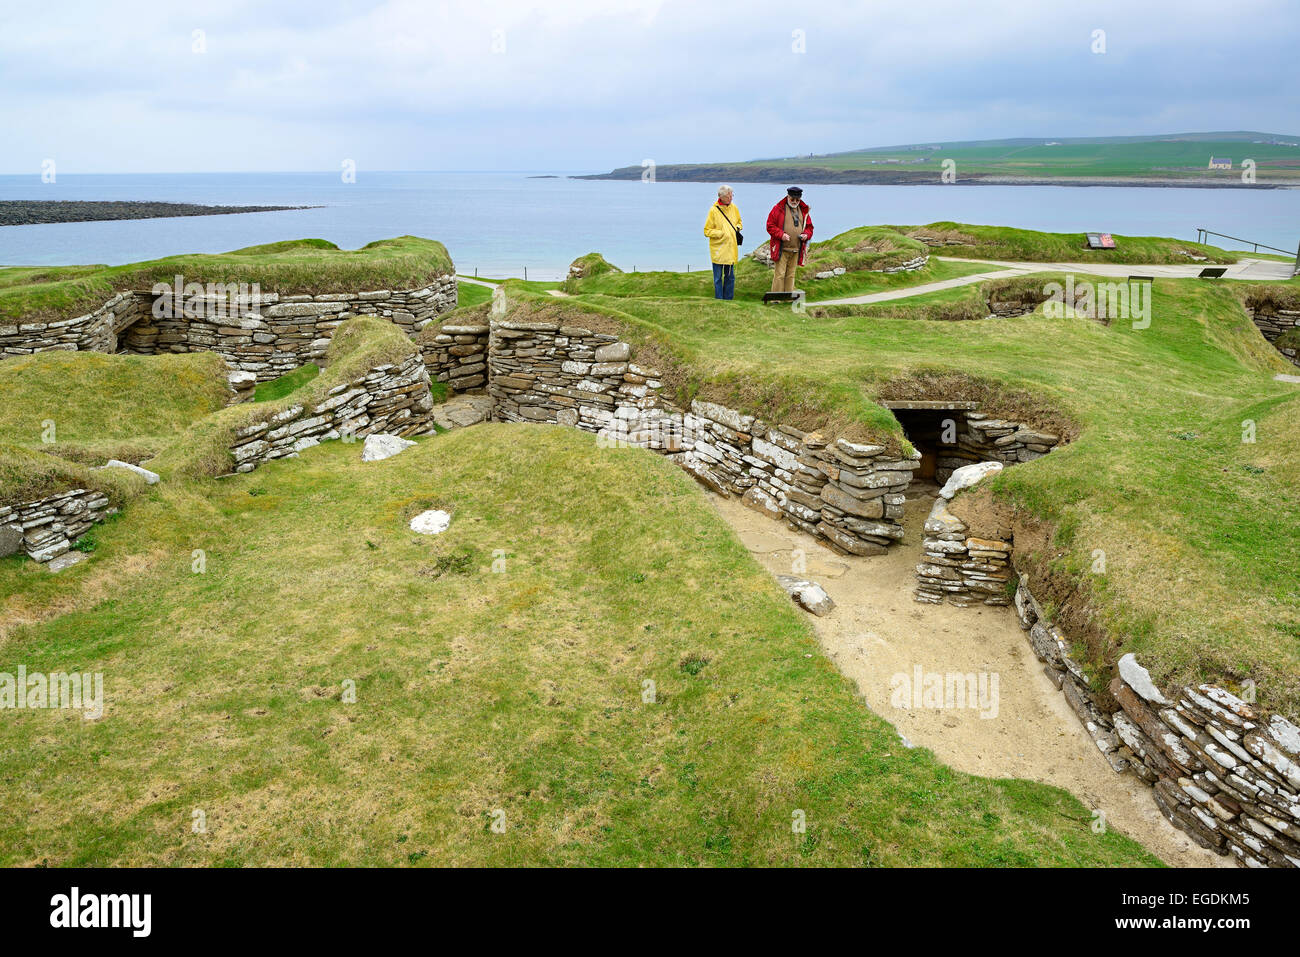 Two tourists visiting the Neolithic settlement Skara Brae, Skara Brae, UNESCO World Heritage Site The Heart of Neolithic Orkney, Orkney Islands, Scotland, Great Britain, United Kingdom Stock Photo